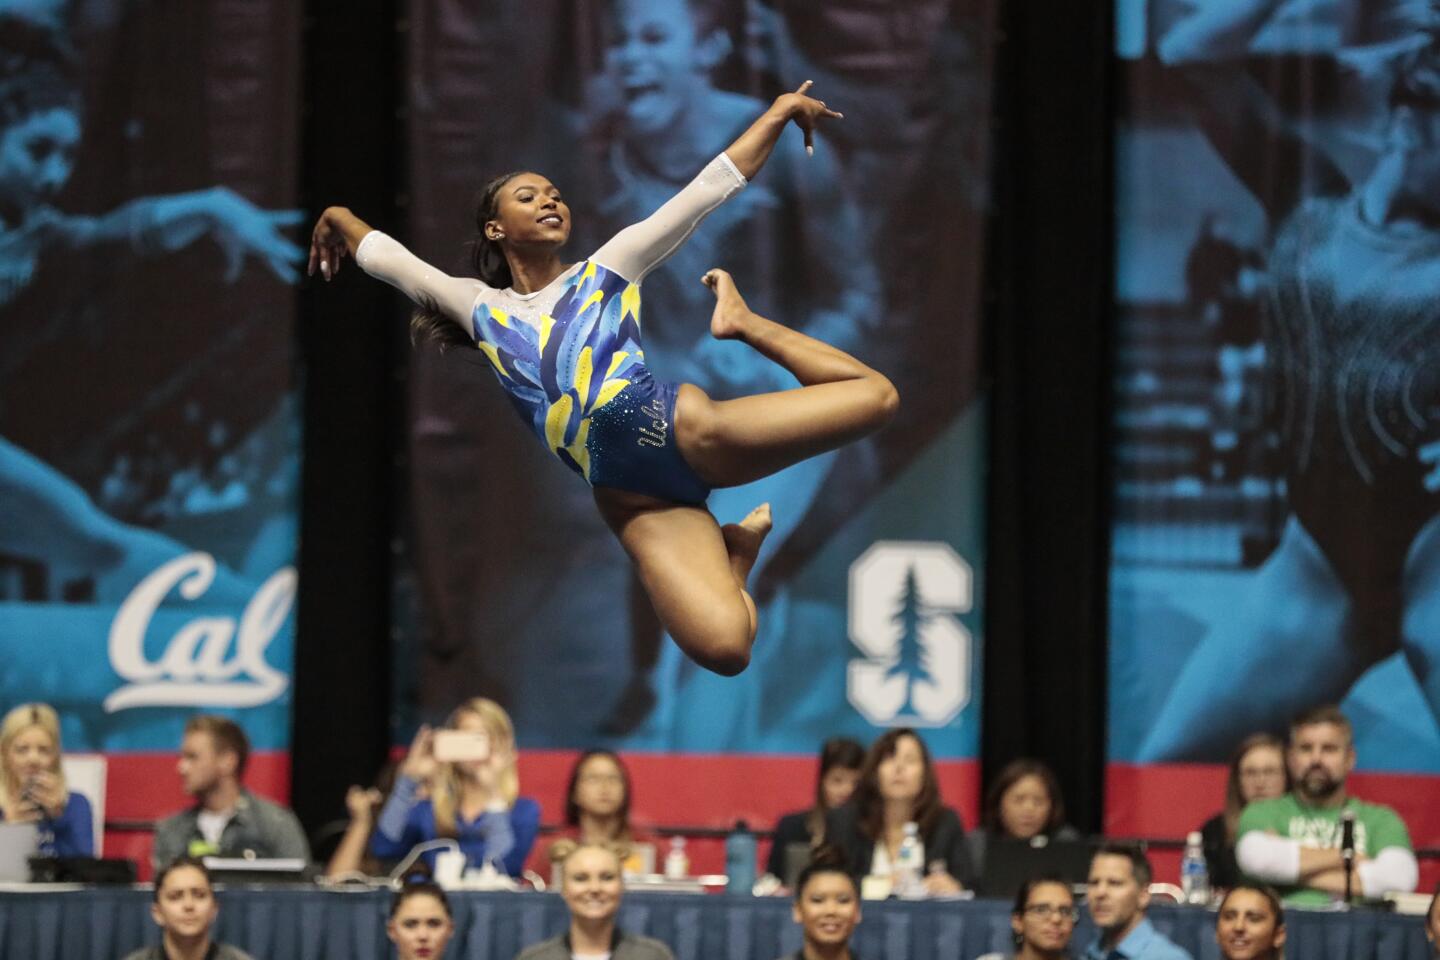 Nia Dennis competes for the Bruins in the floor competition at the Collegiate Challenge meet.